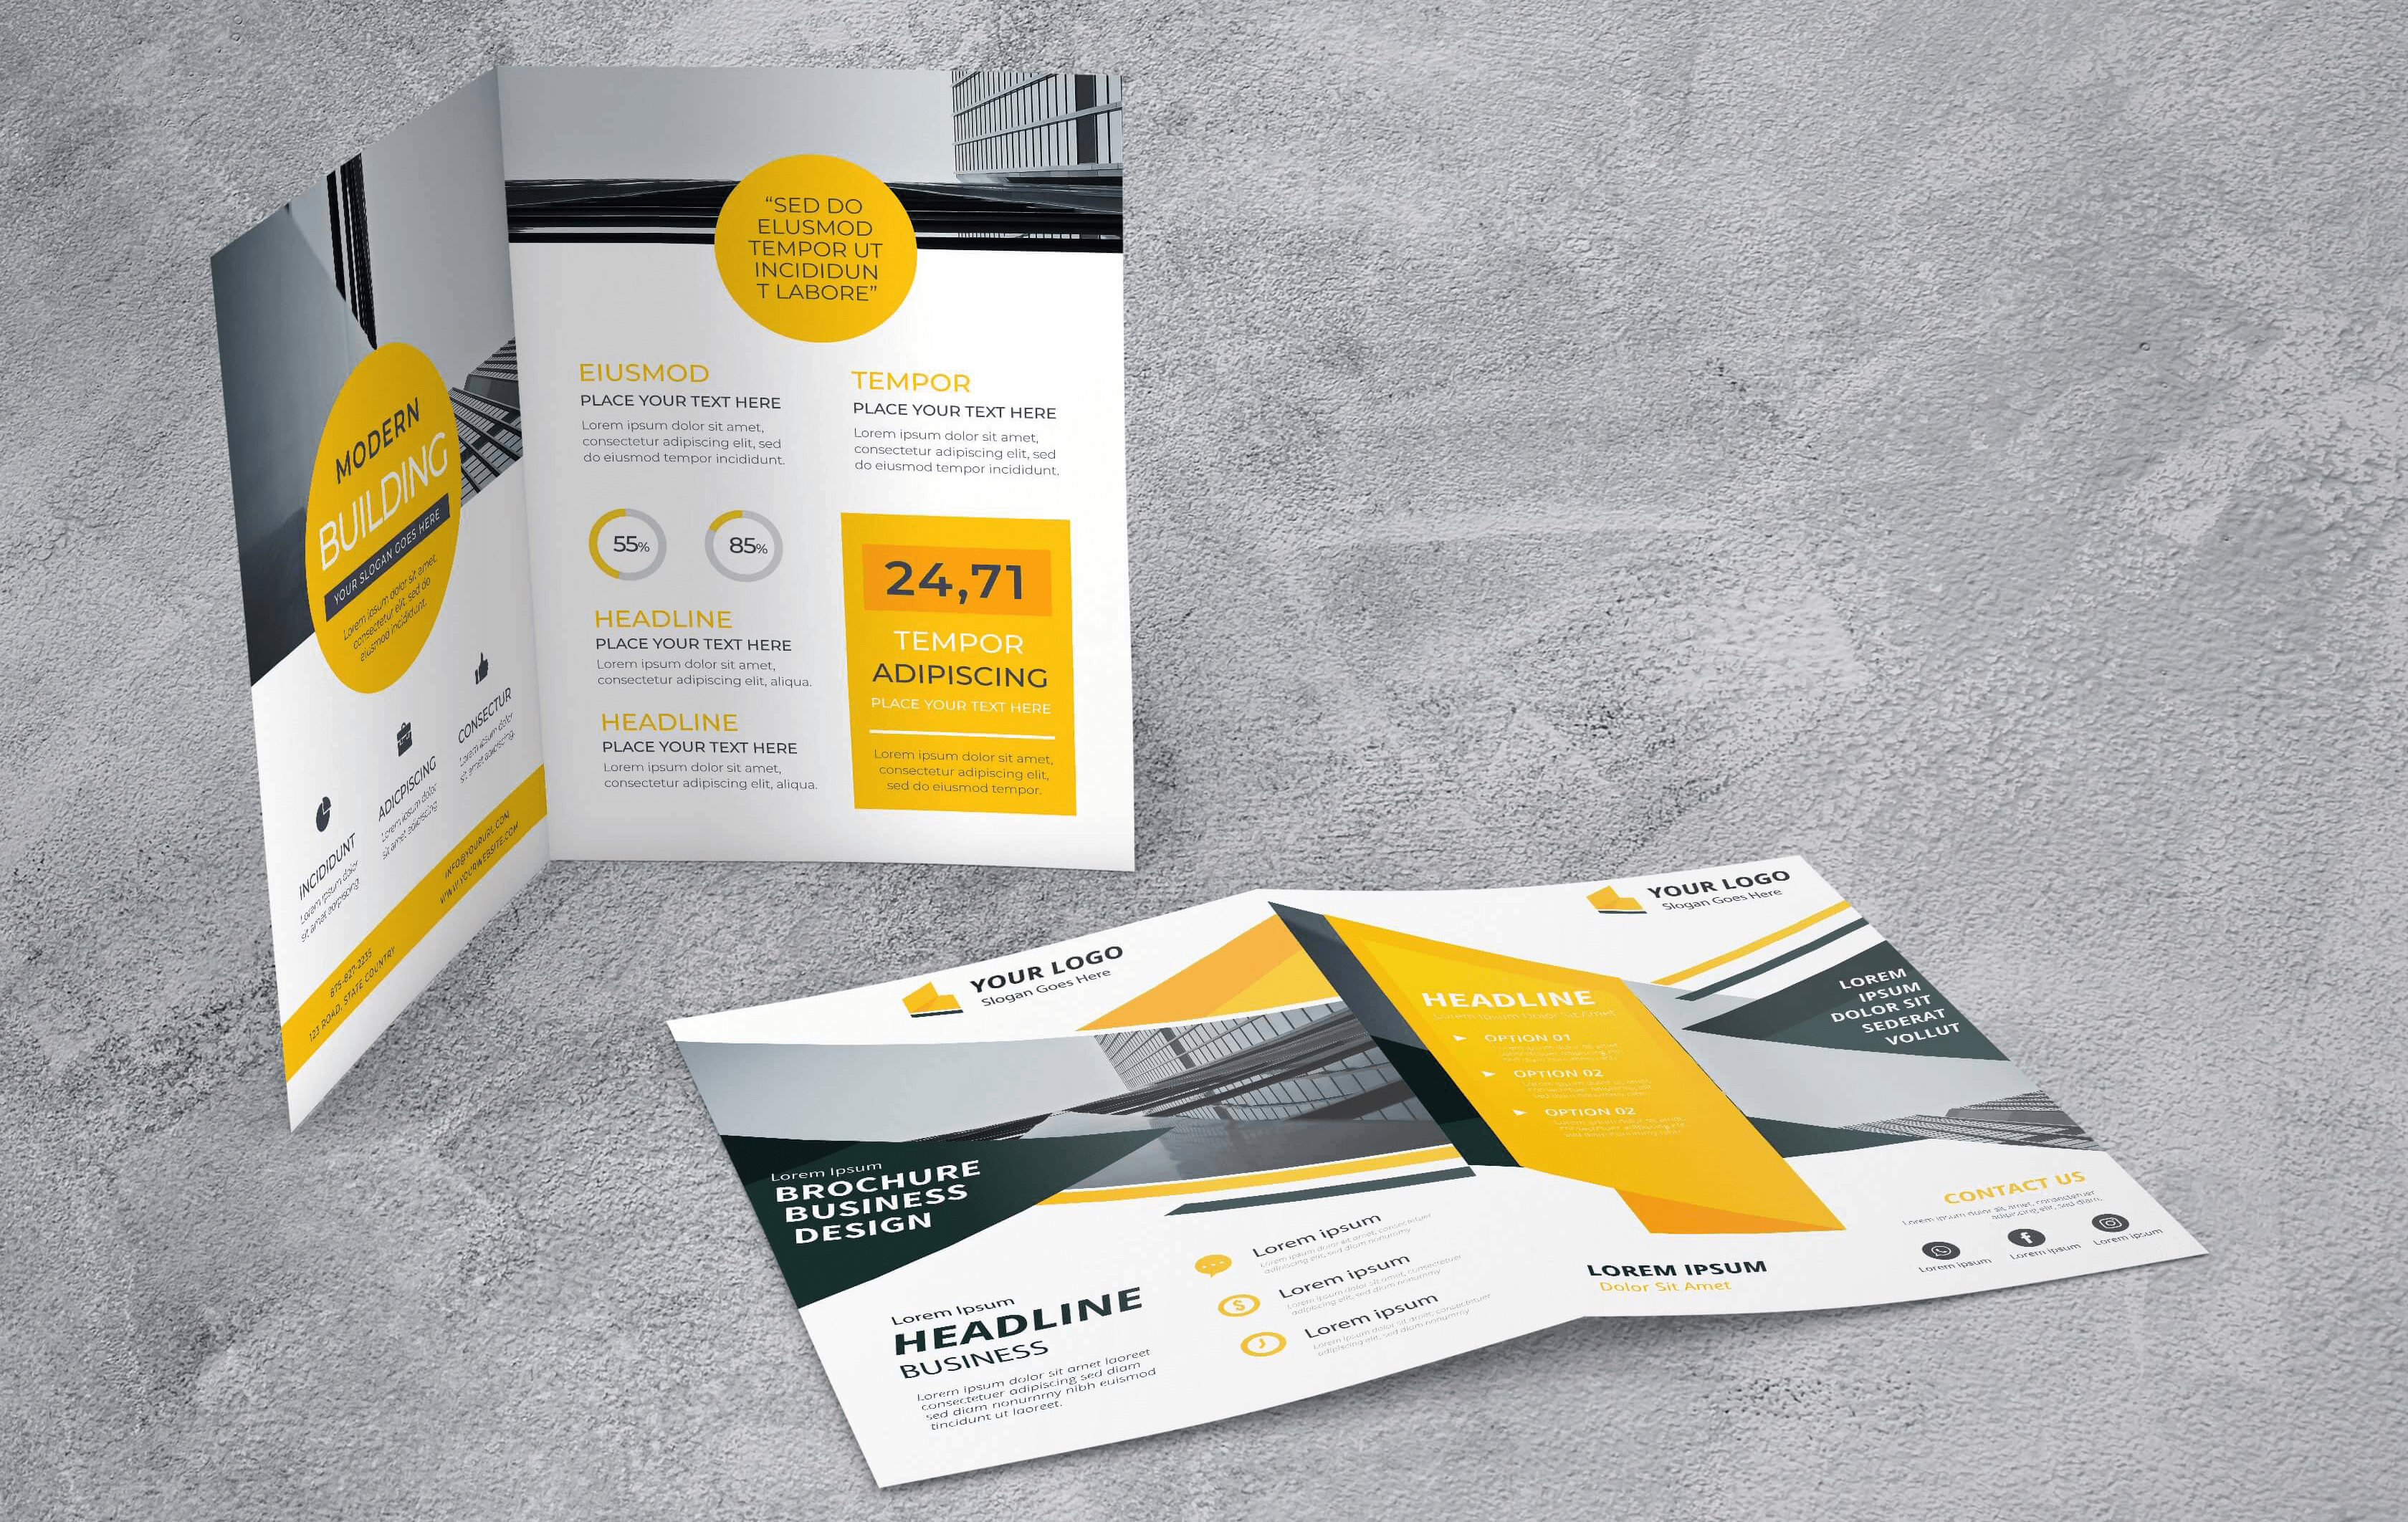 A mock up of two brochures